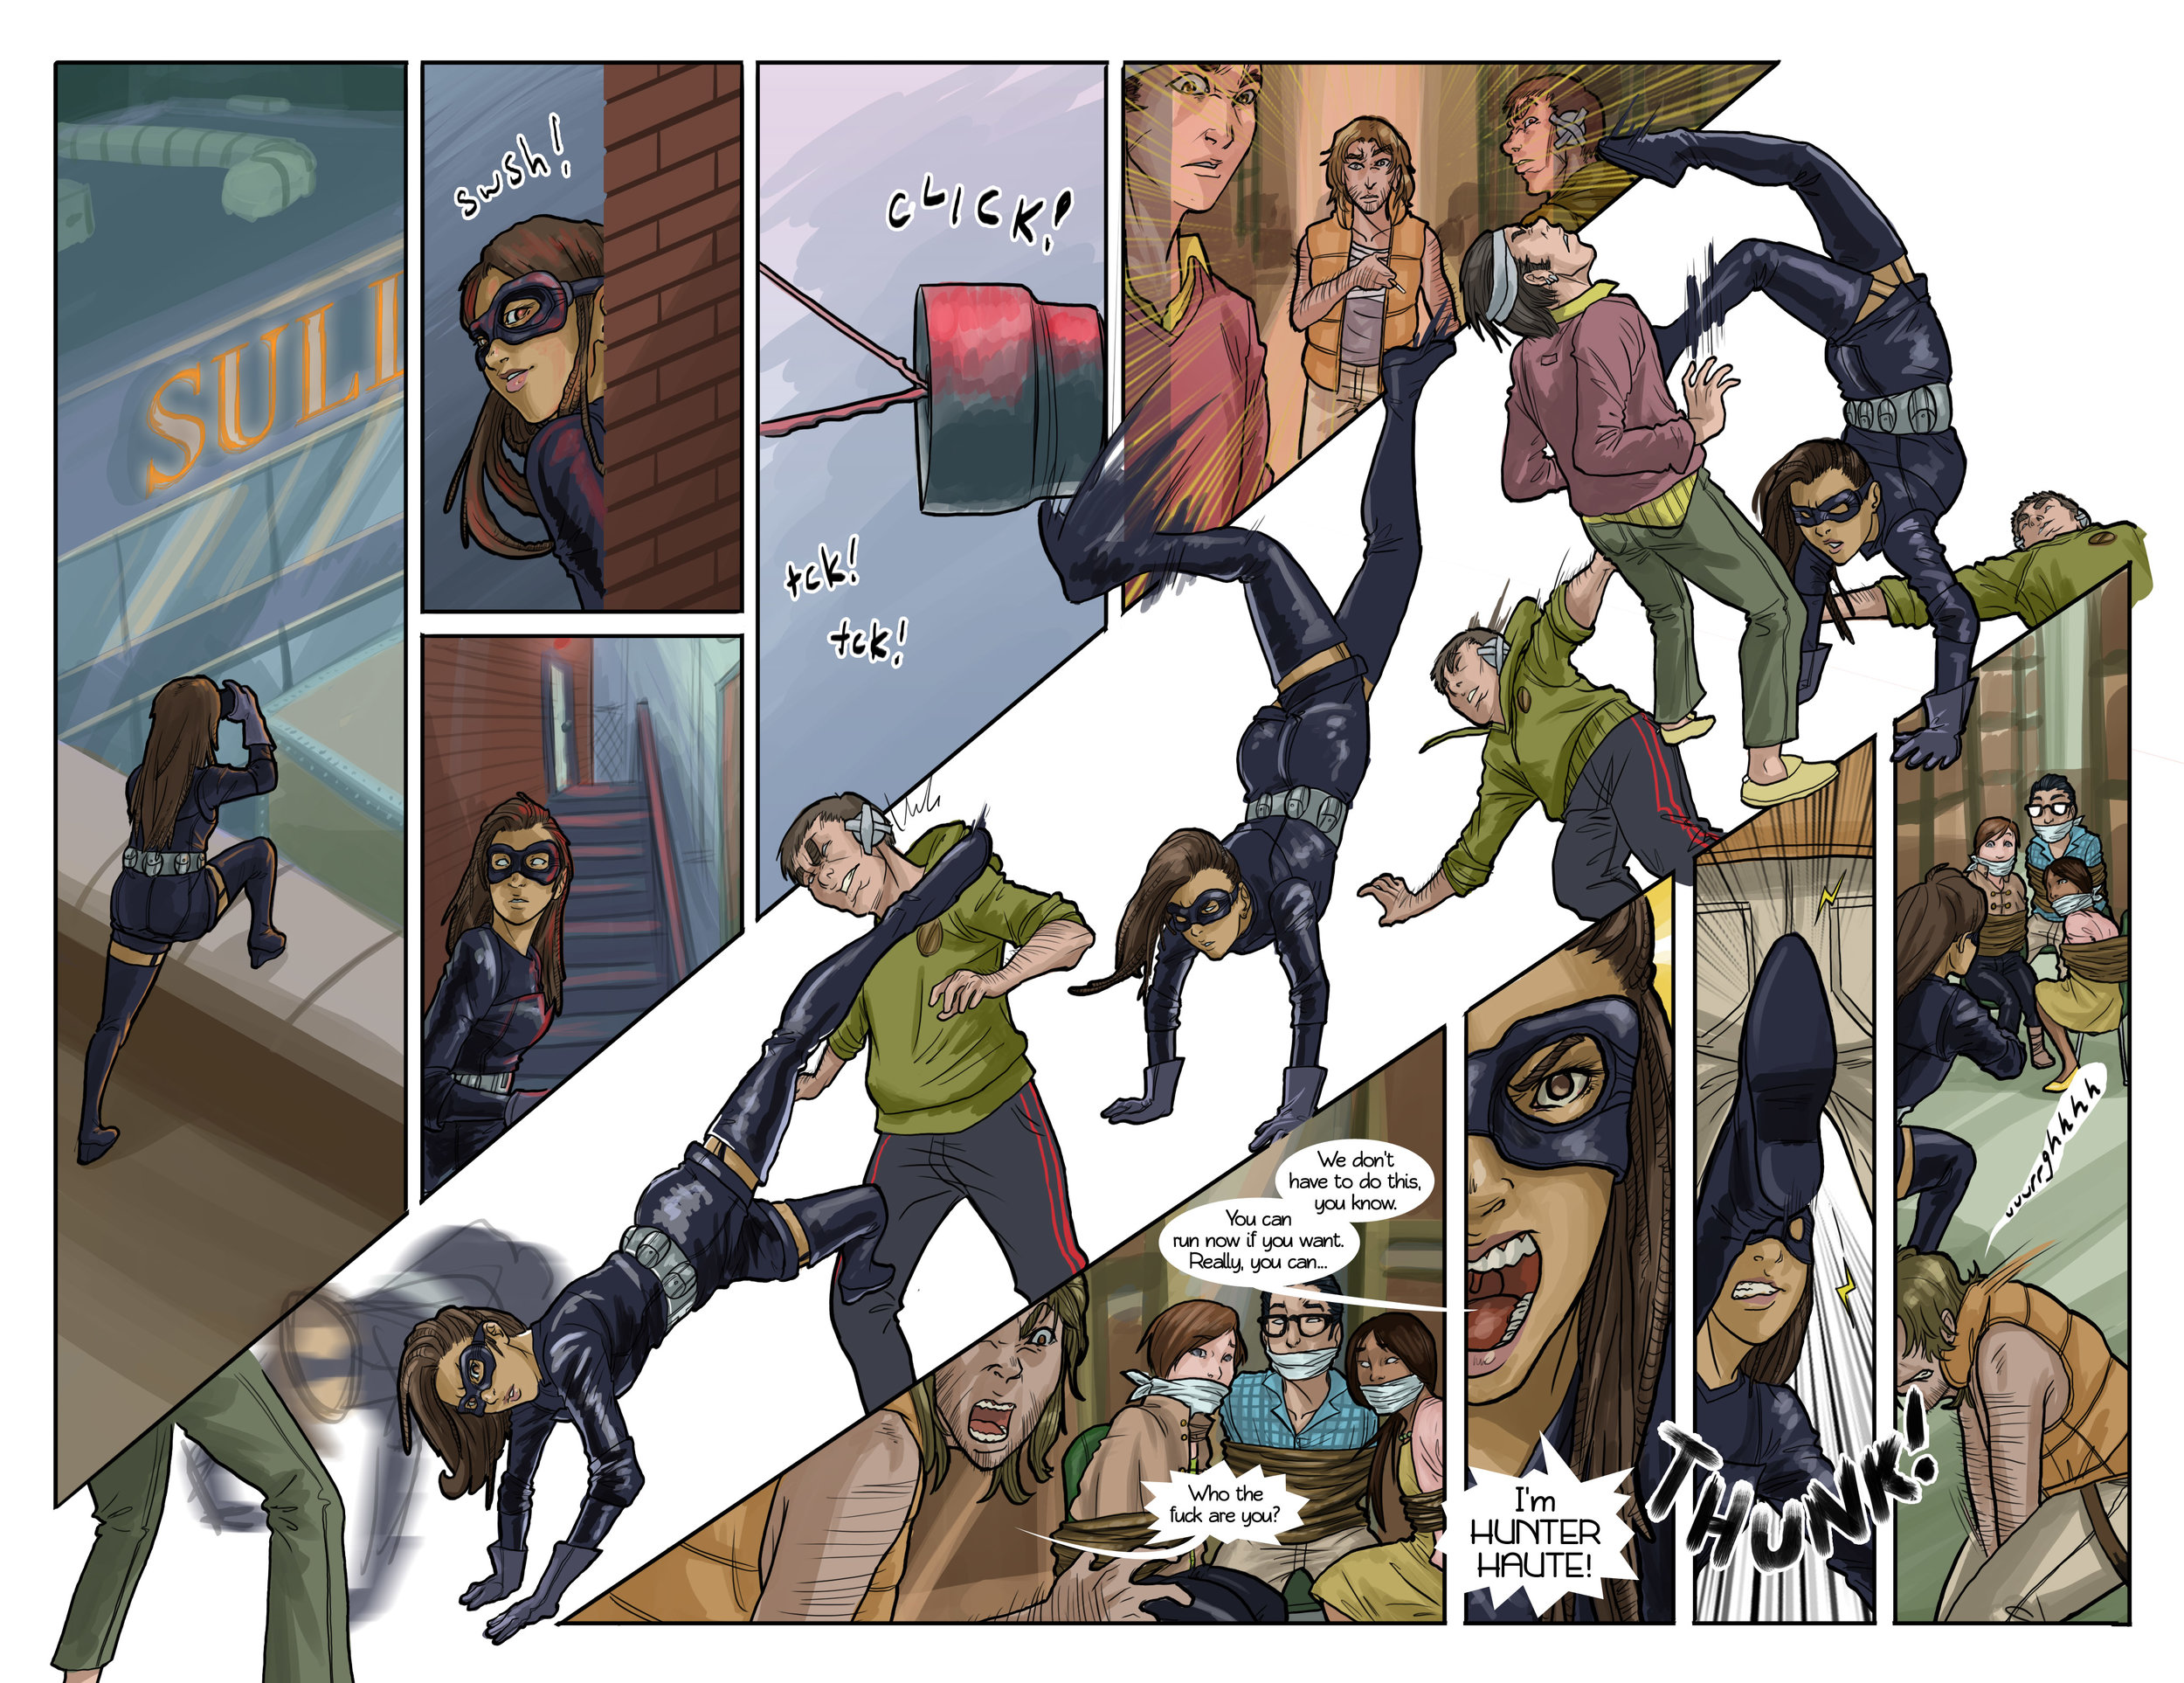 HH_13-14_double-page spread.jpg